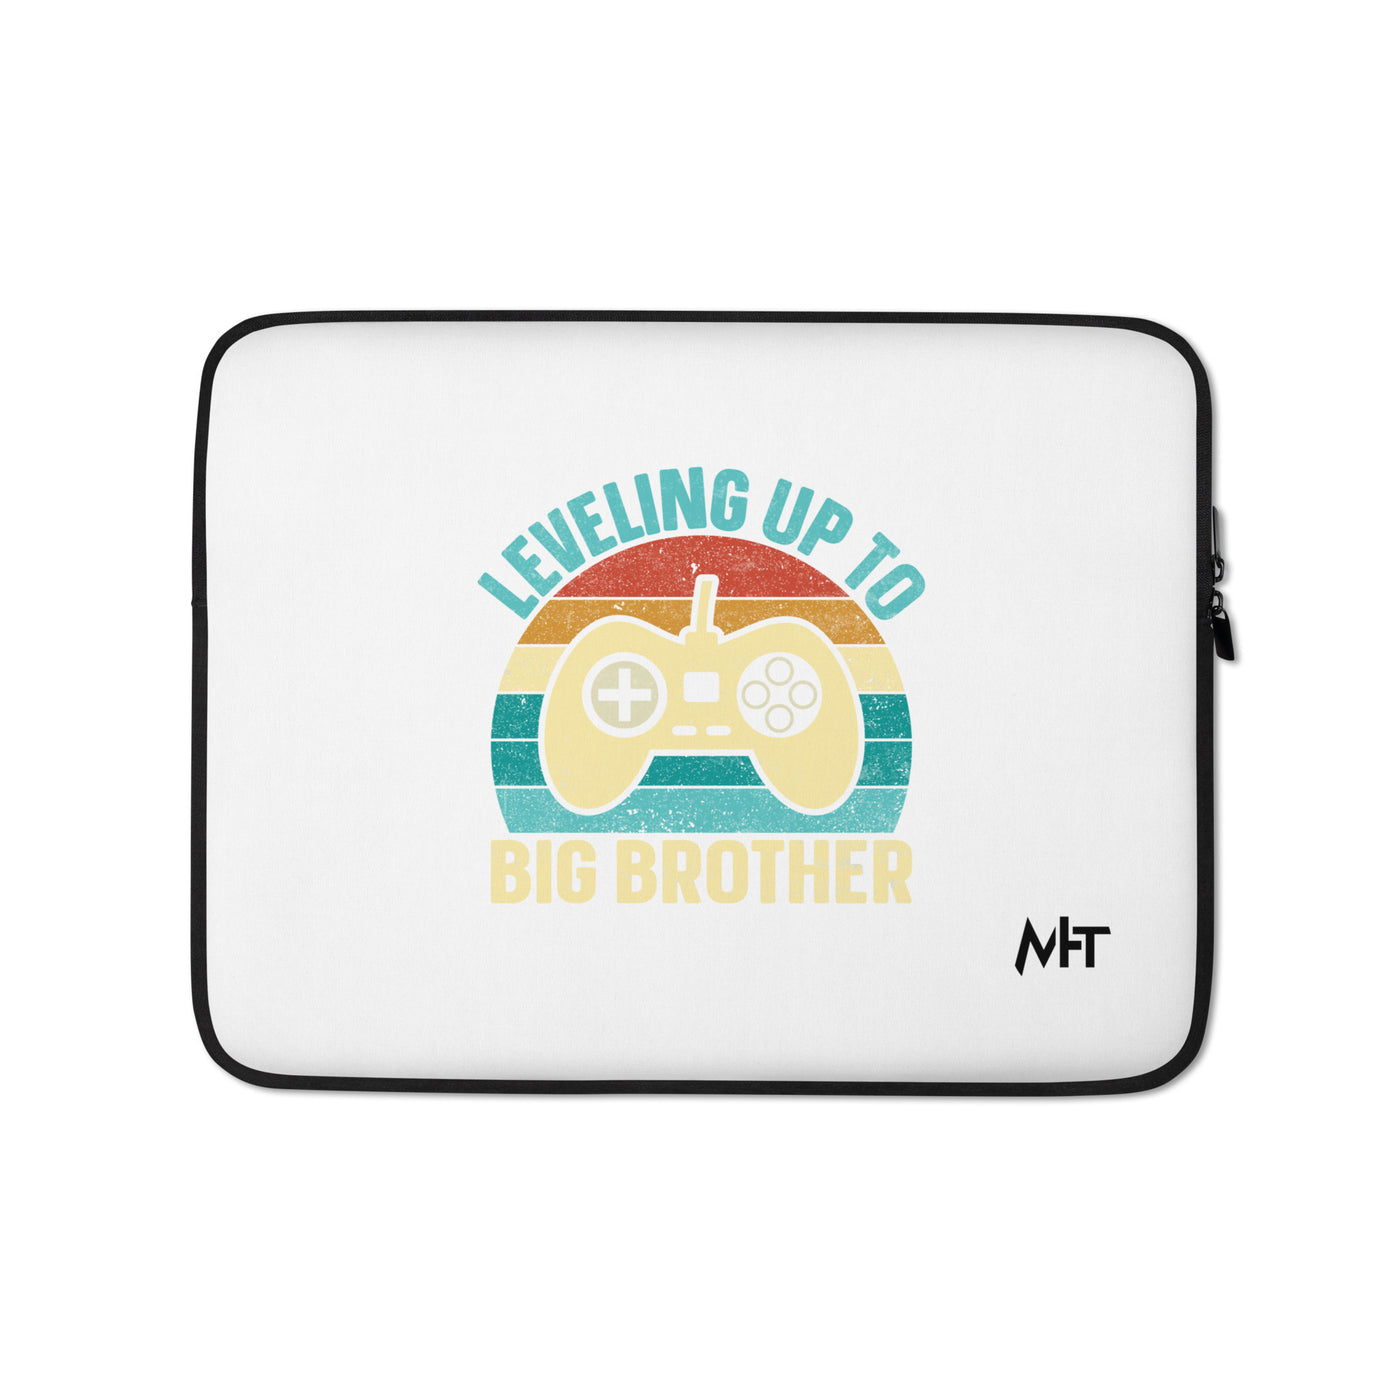 Levelling up to Big Brother V2 in Darker Shade - Laptop Sleeve